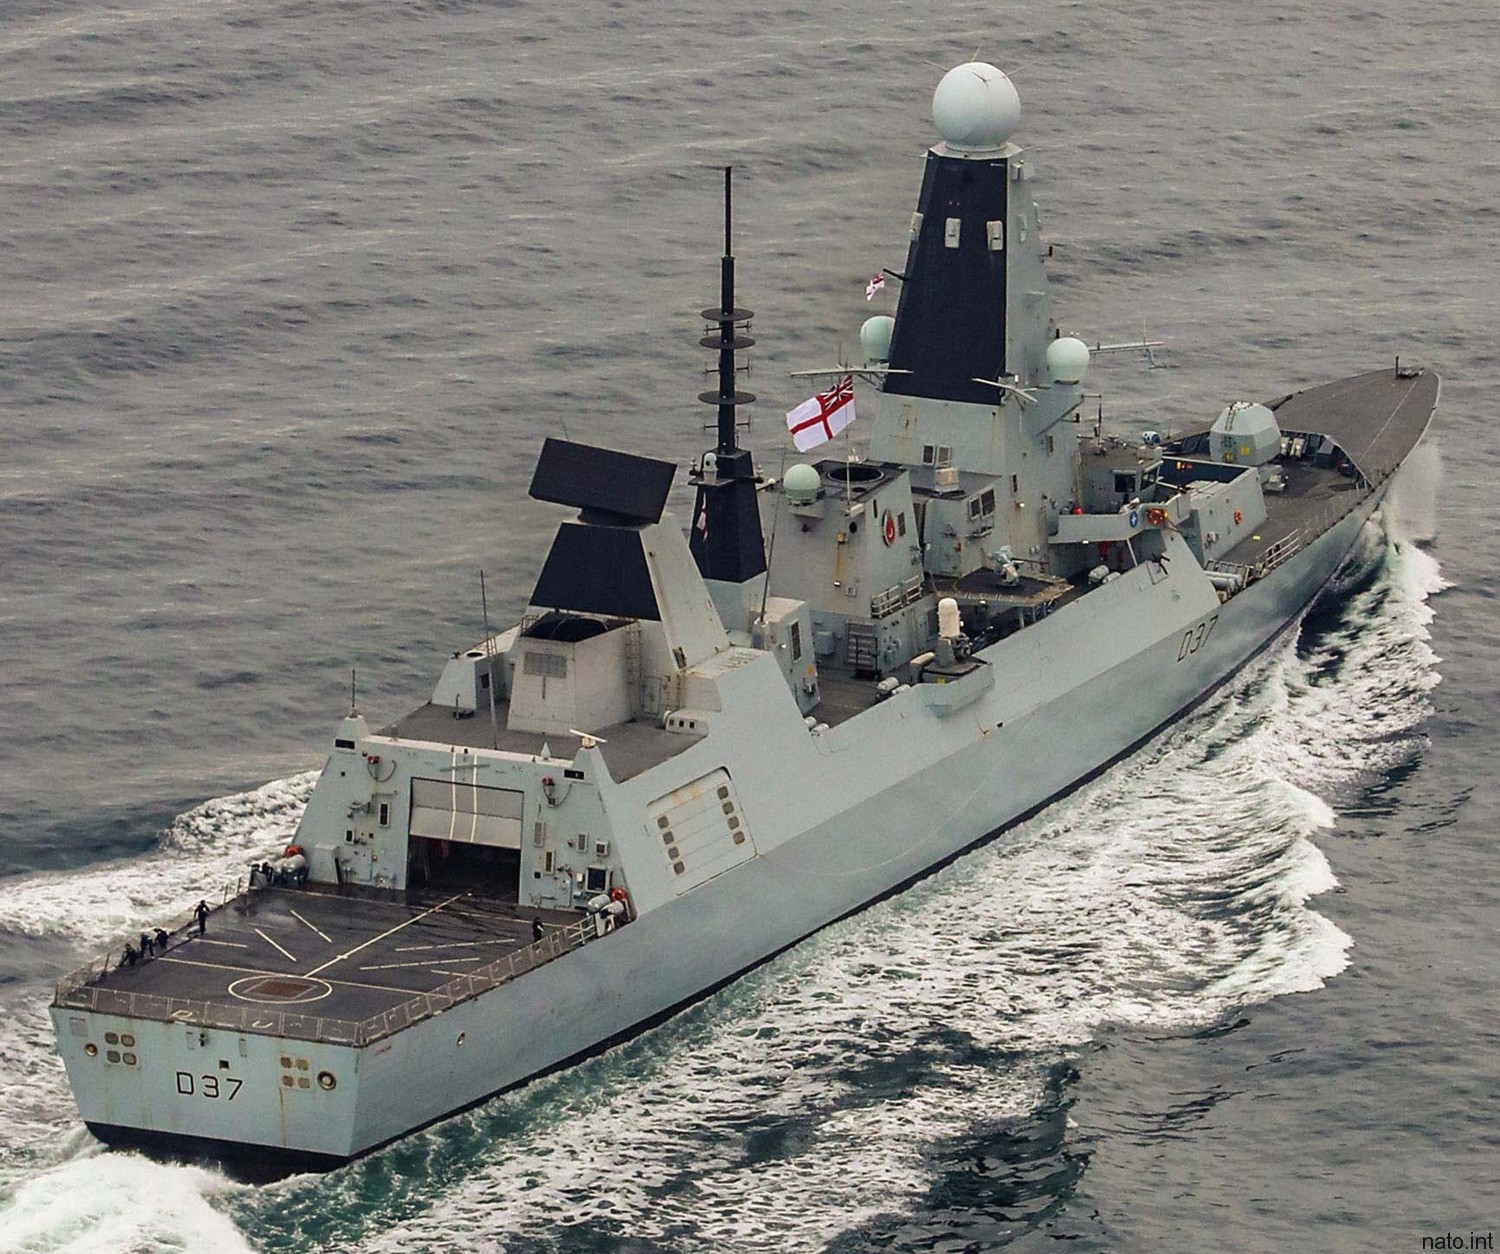 d37 hms duncan d-37 type 45 daring class guided missile destroyer ddg royal navy sea viper 33